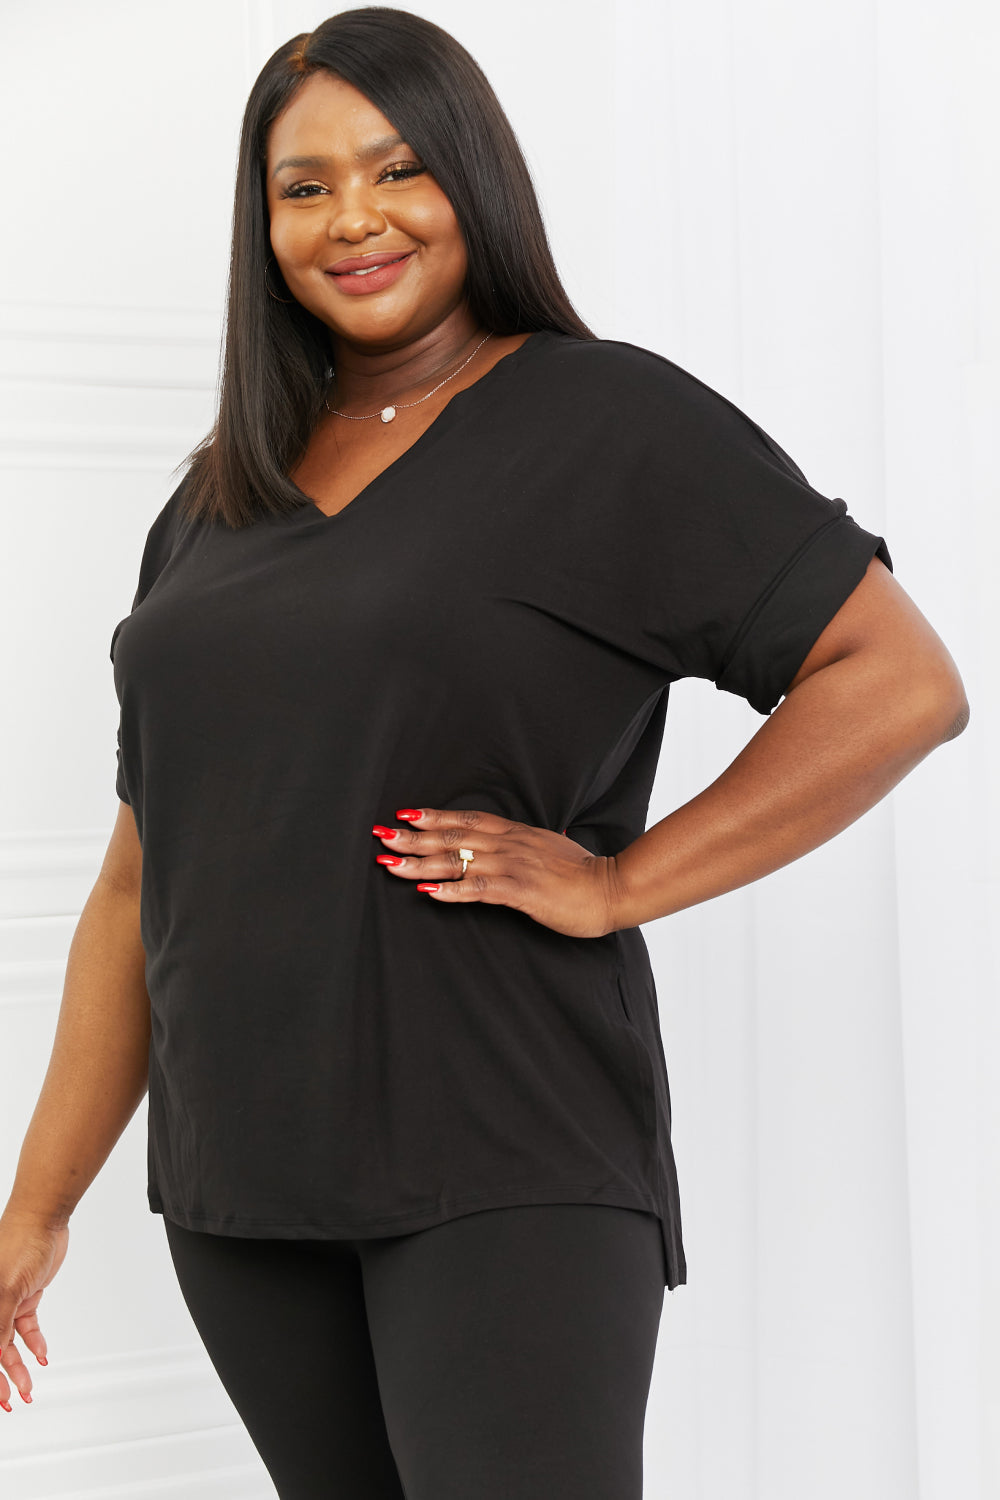 Self Love Full Size Brushed DTY Microfiber Lounge Set in Black - Women’s Clothing & Accessories - Shirts & Tops - 5